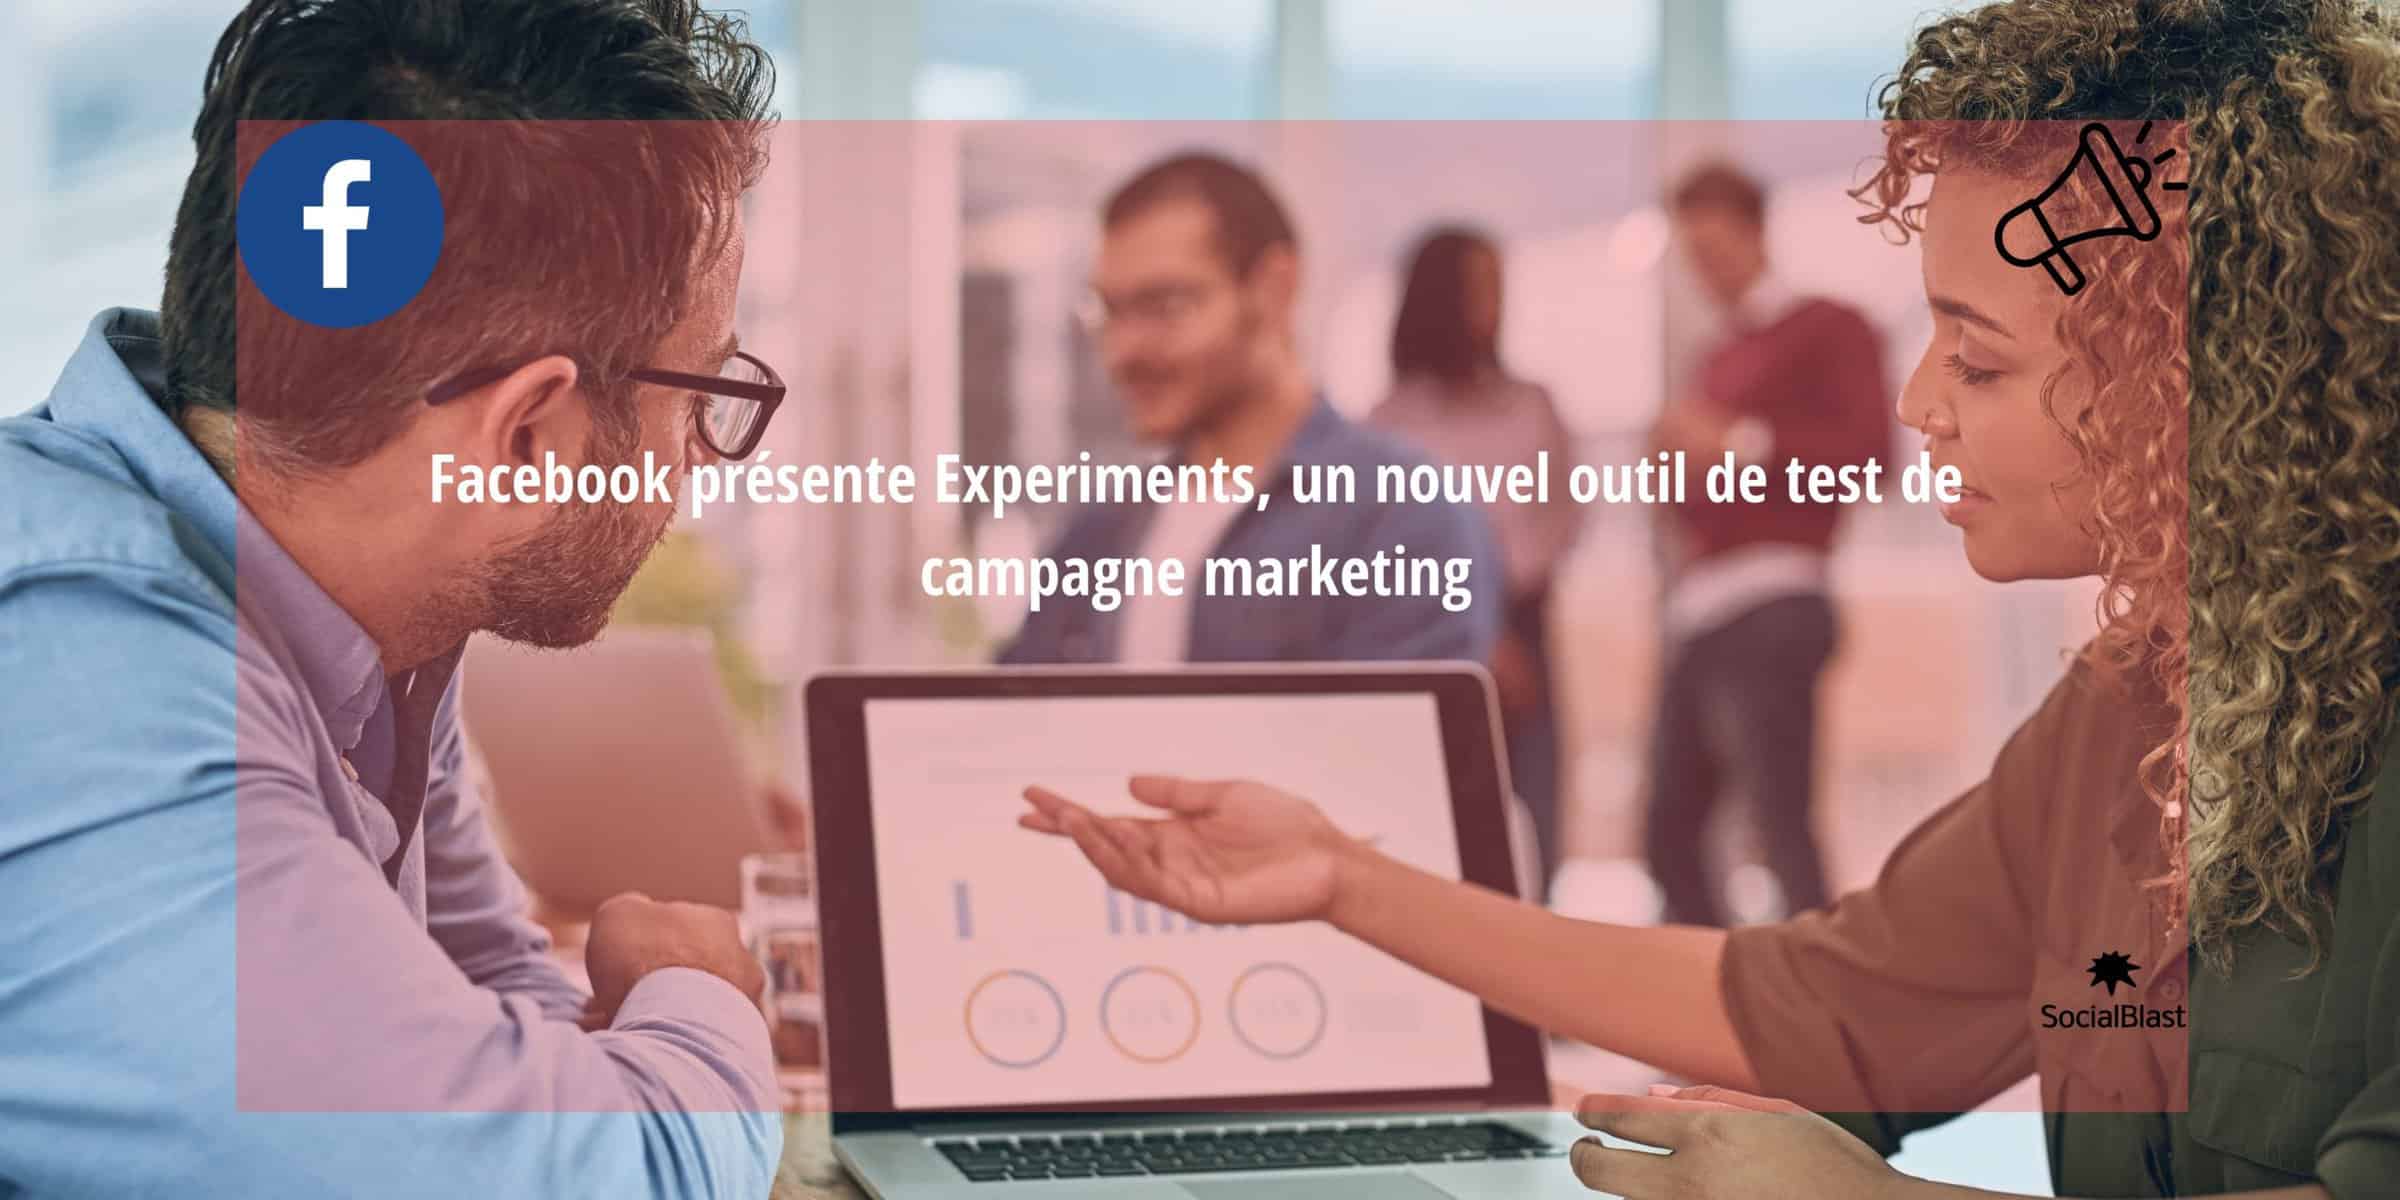 Facebook introduces Experiments, a new marketing campaign testing tool